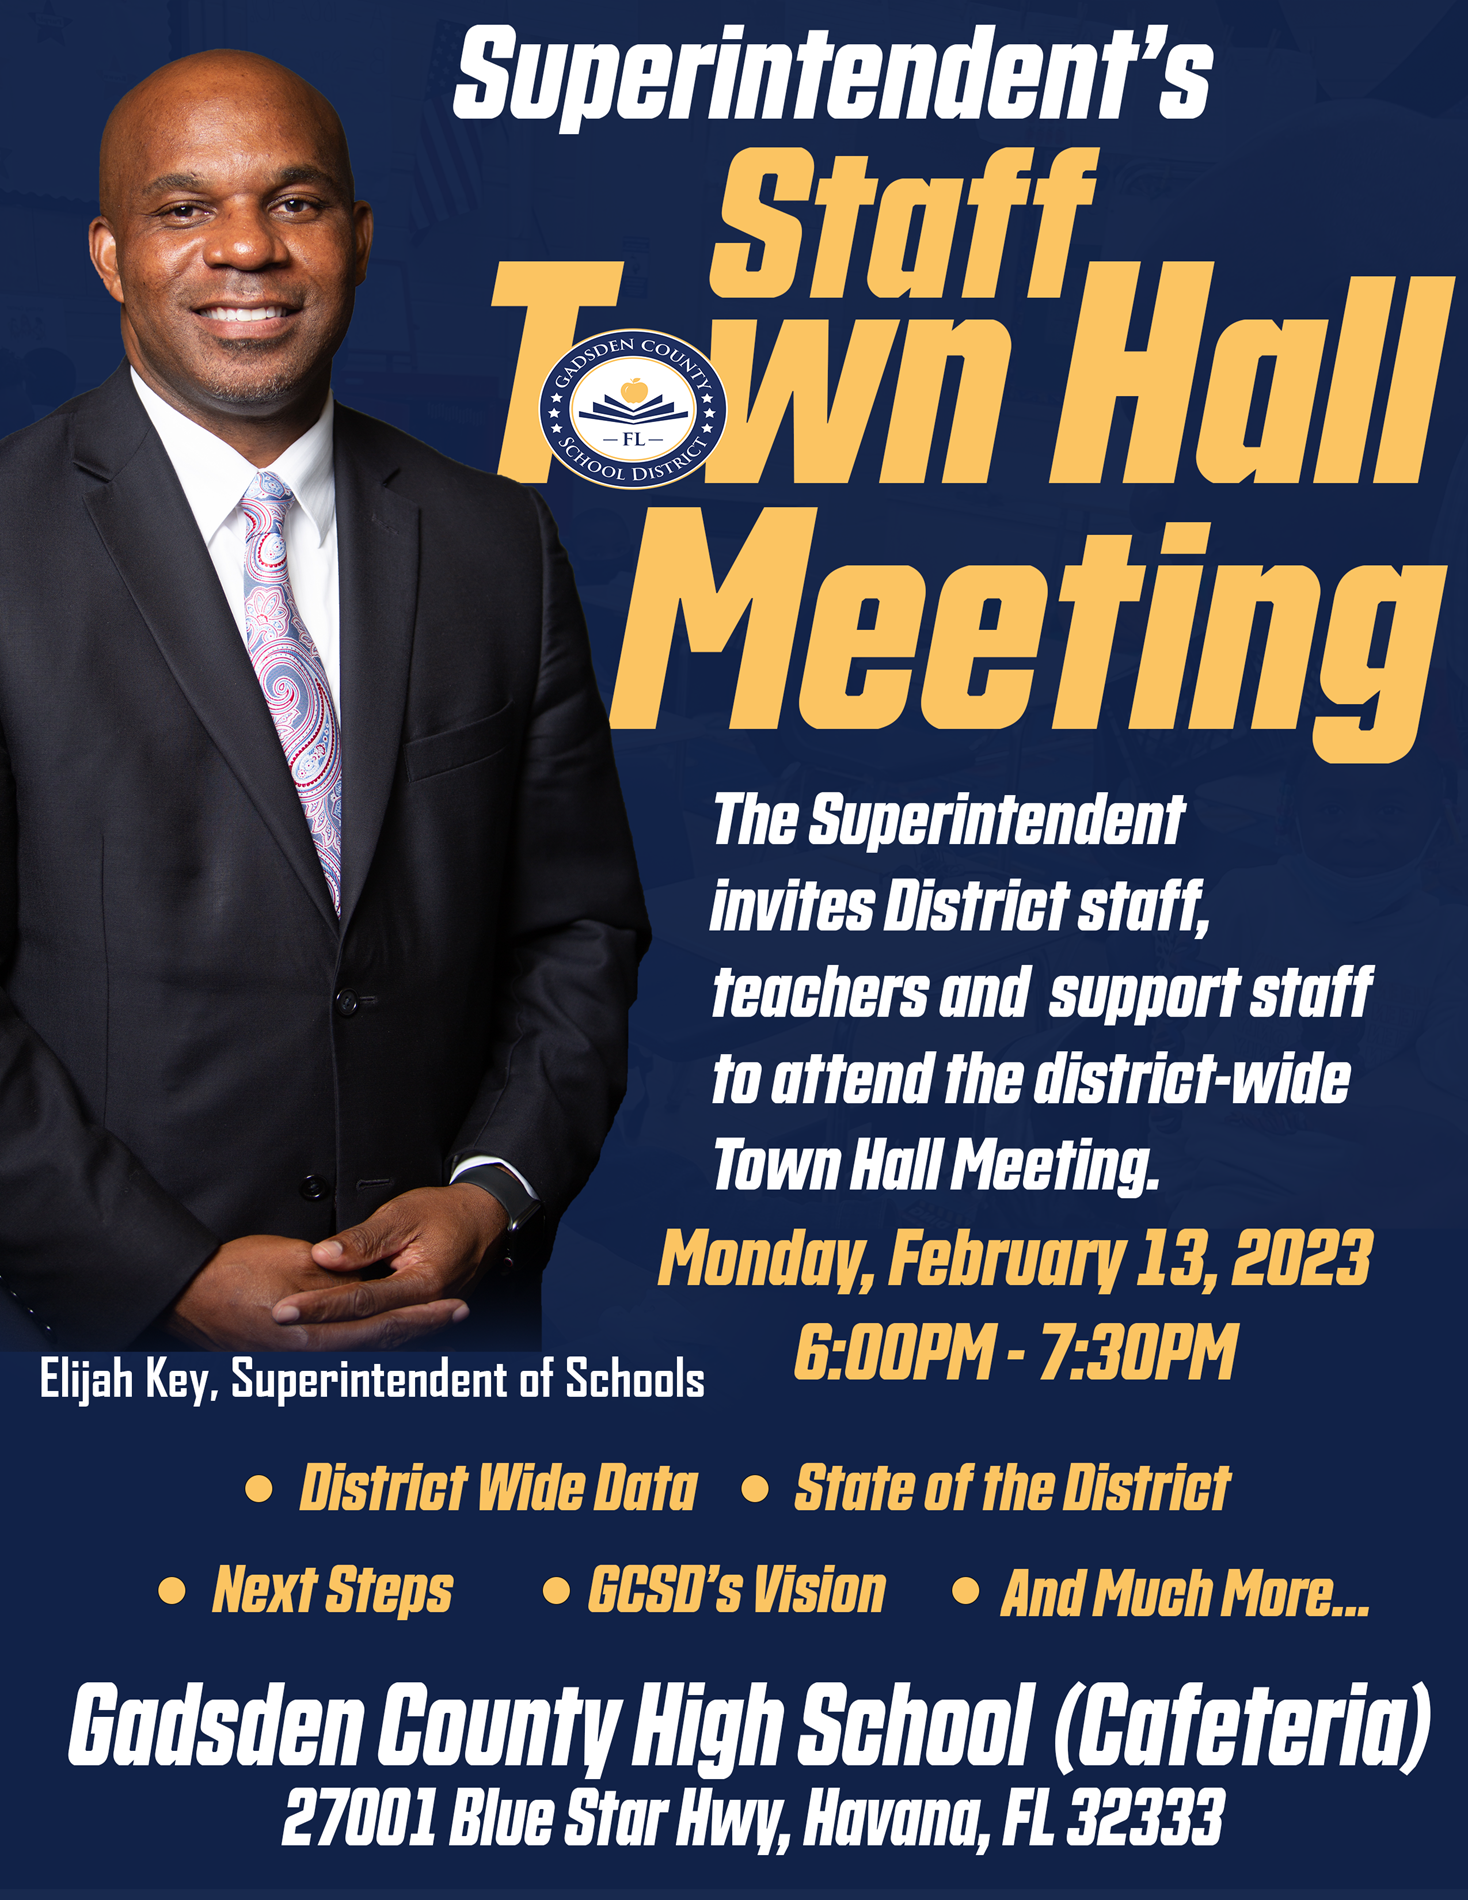 Superintendent's Staff Town Hall Meeting on February 13th 